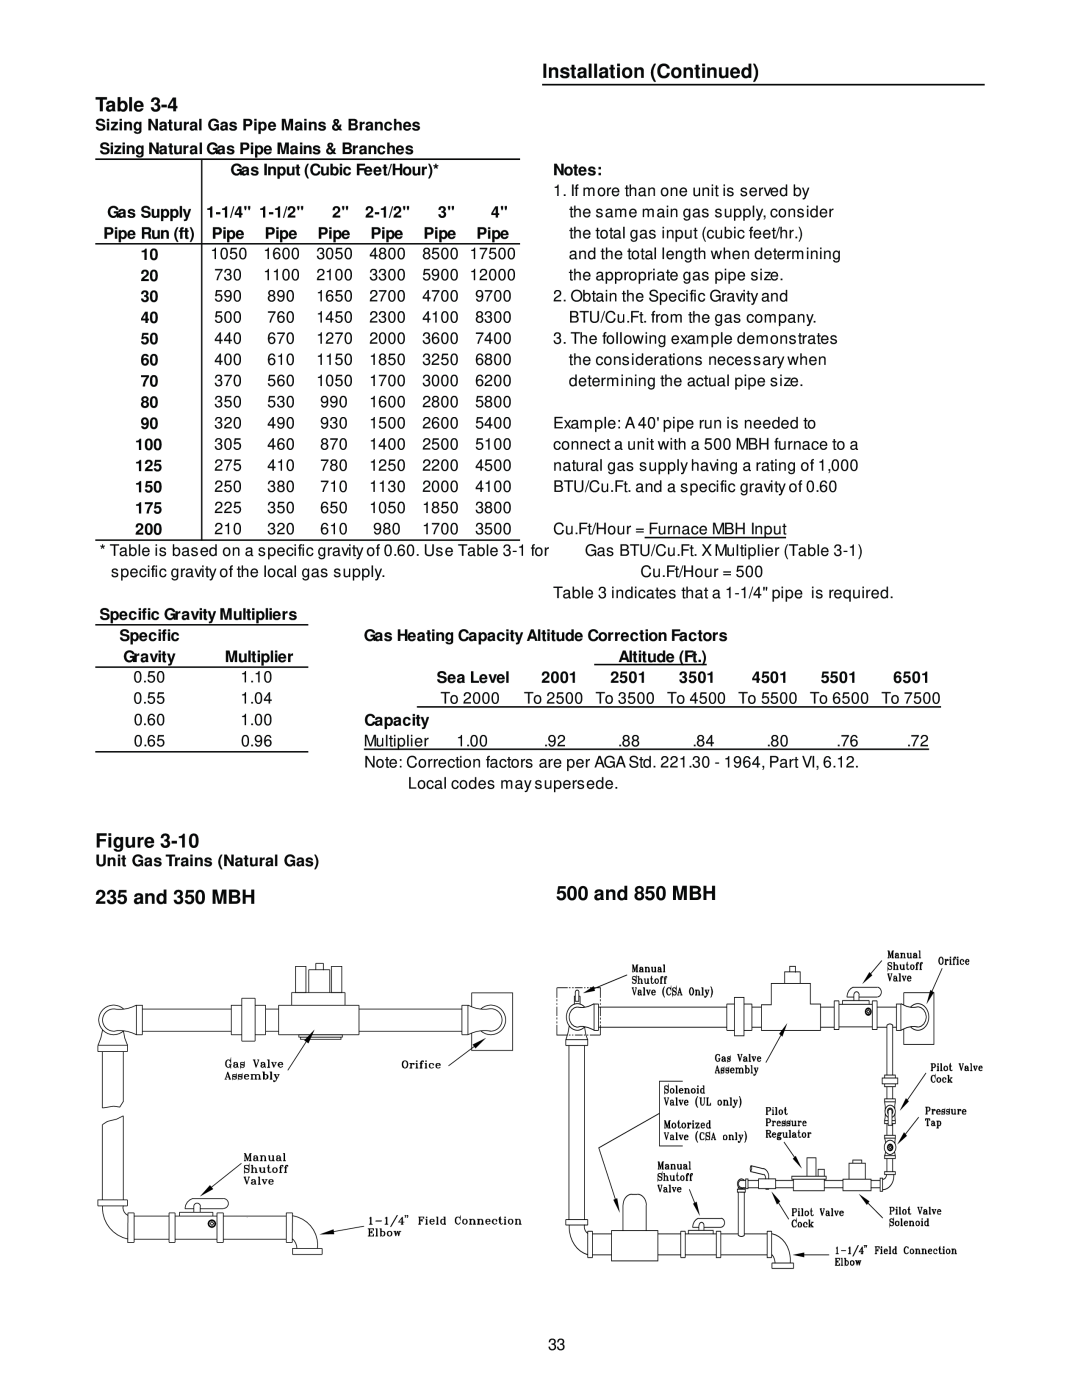 Trane RT-SVX10C-EN specifications Table, and 350 MBH, and 850 MBH, Installation Continued, Figure 